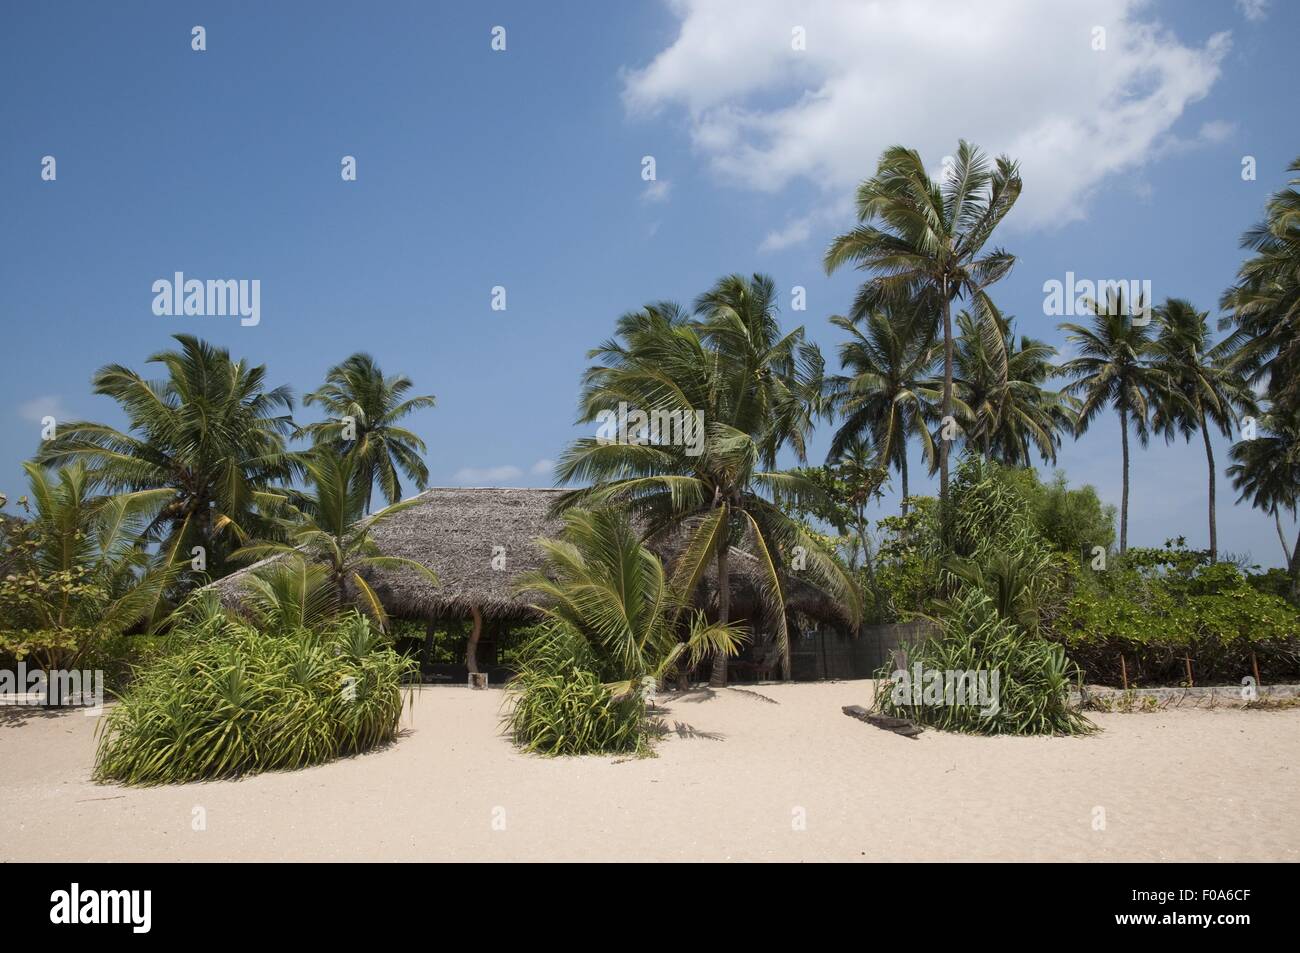 View of palm trees and hut on Tangalle beach, Sri Lanka Stock Photo